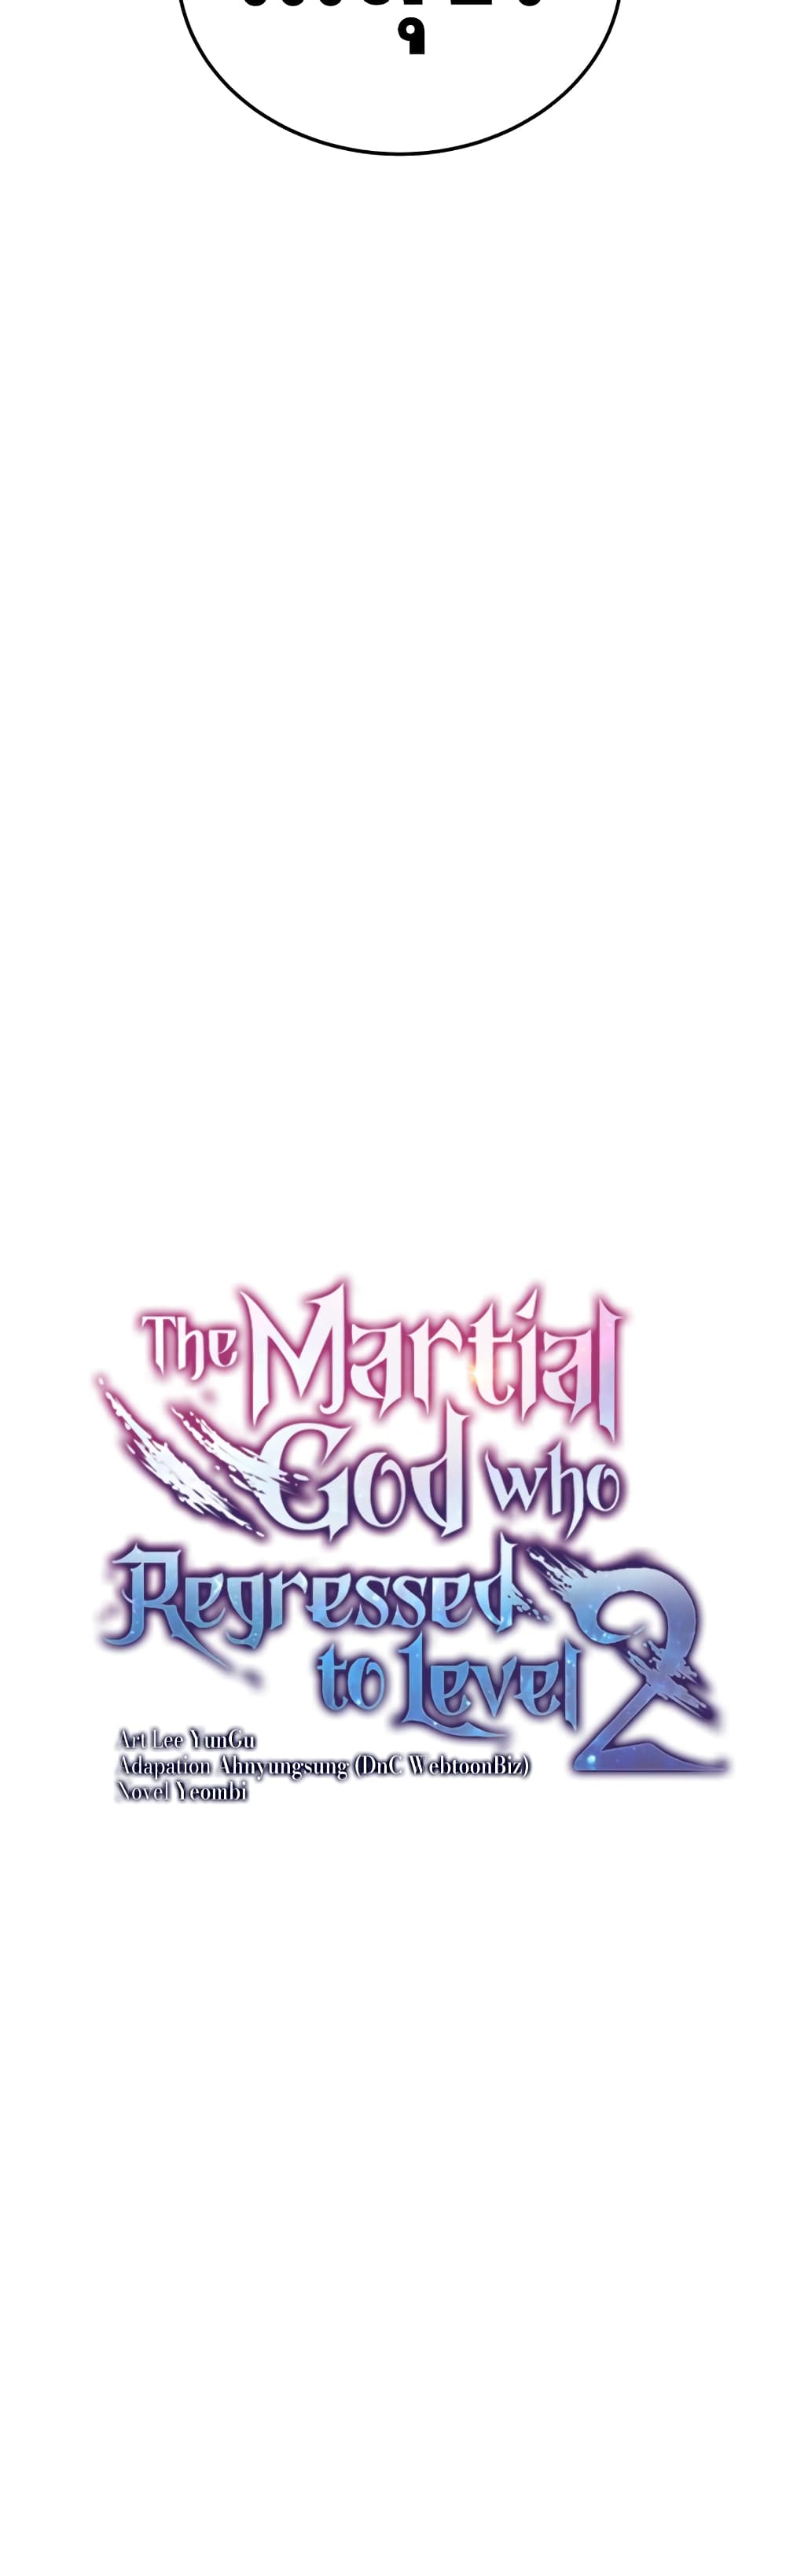 Martial God Regressed to Level 2 14-14